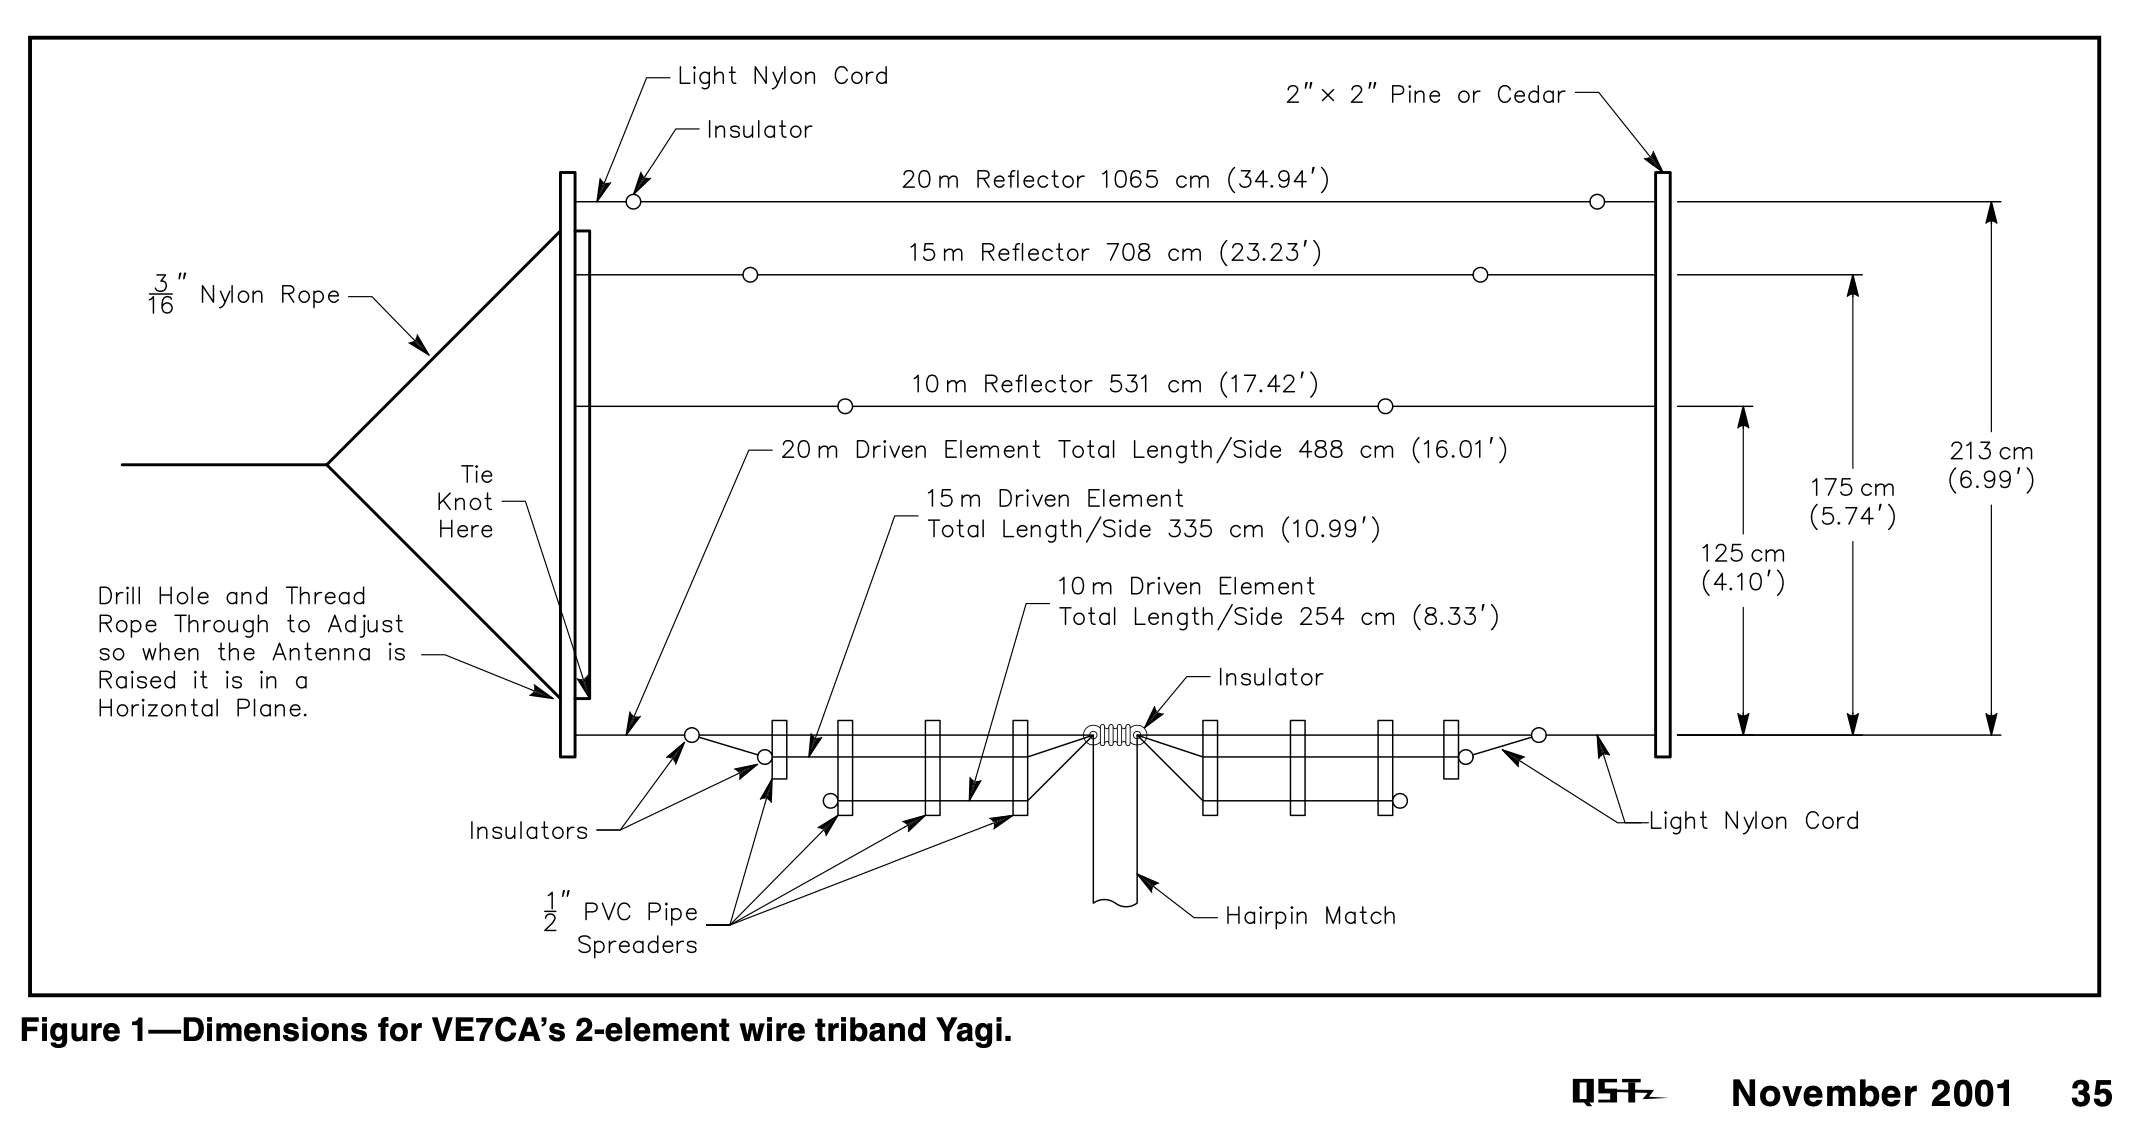 Main Overview Diagram for VE7CA's 2-element wire triband Yagi